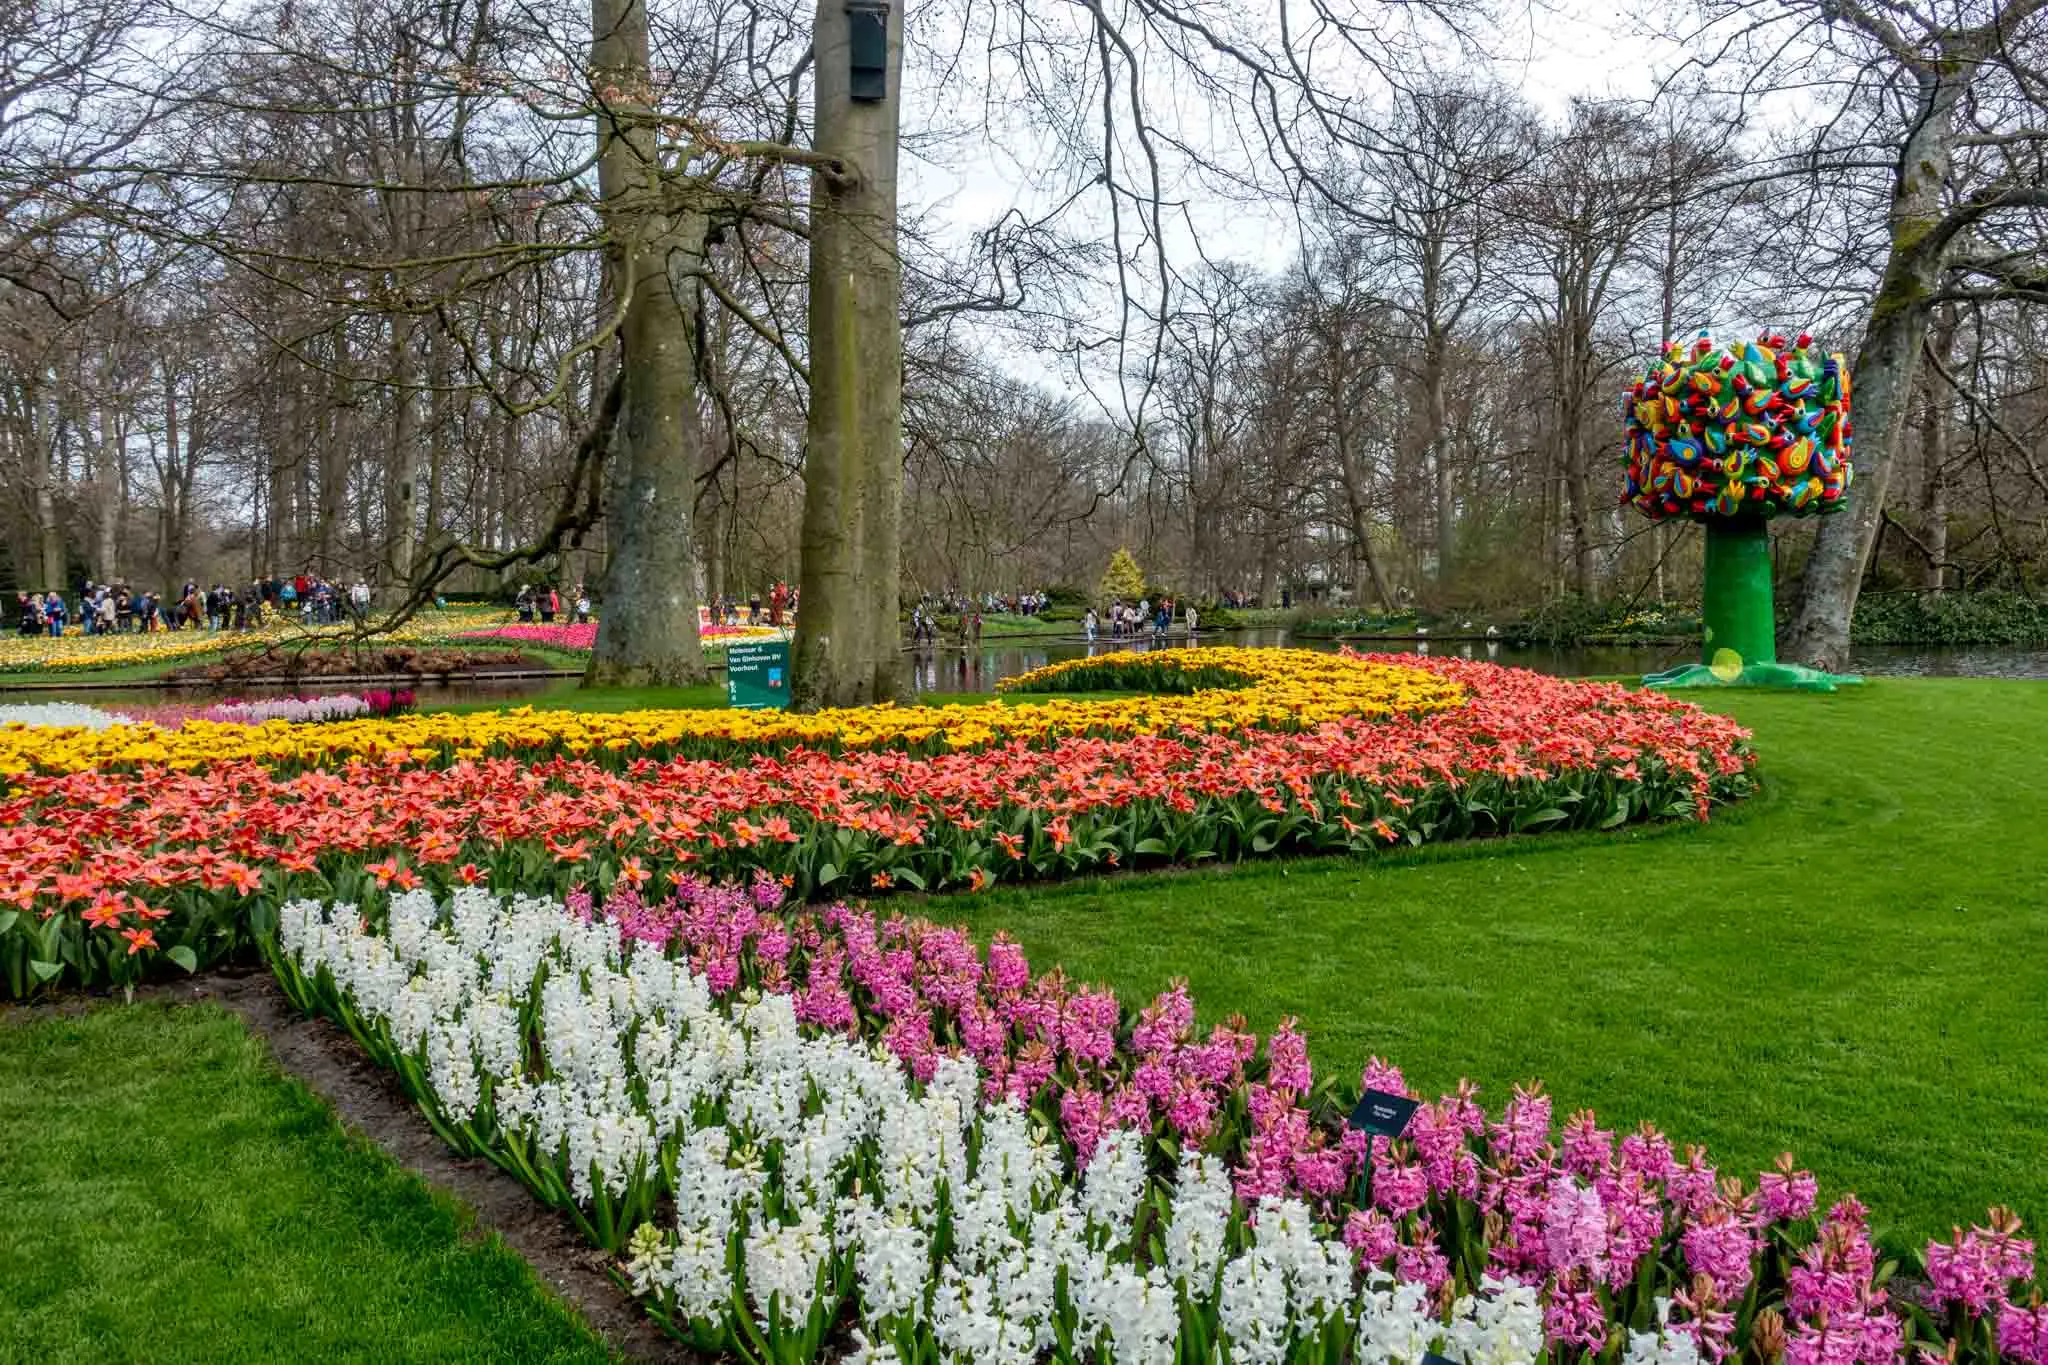 Rows of hyacinths and tulips beside a large, multicolored sculpture